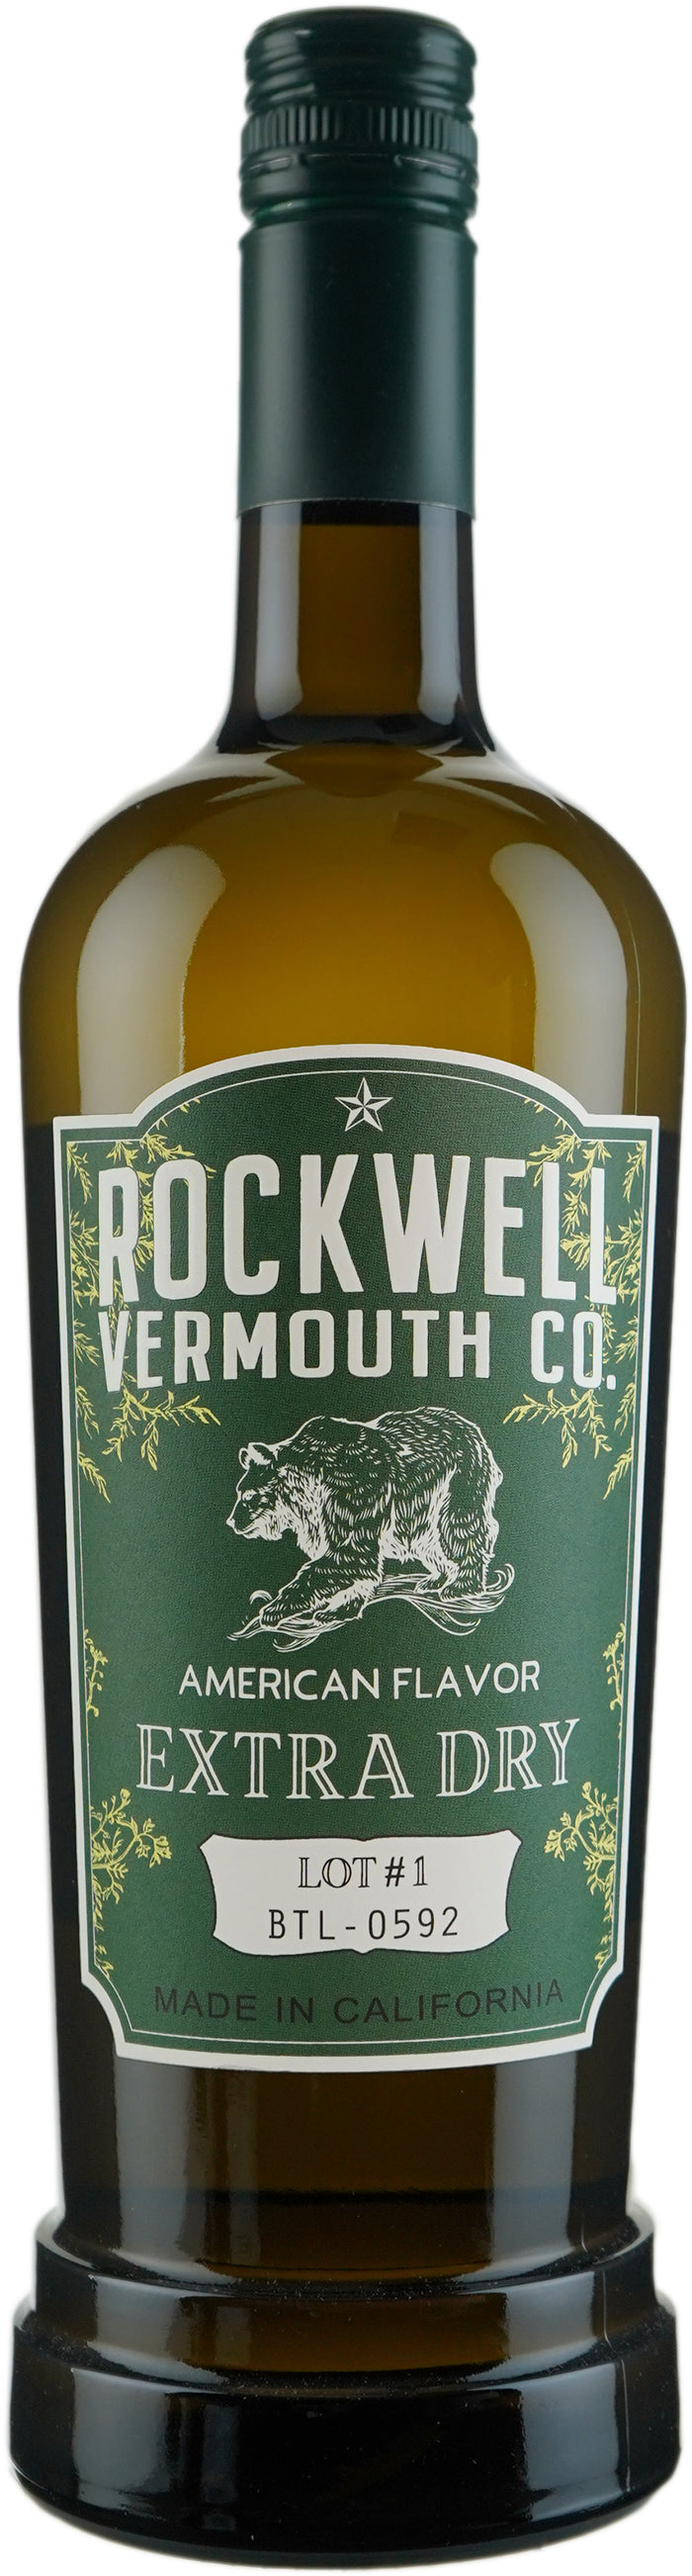 Rockwell Extra Dry Vermouth